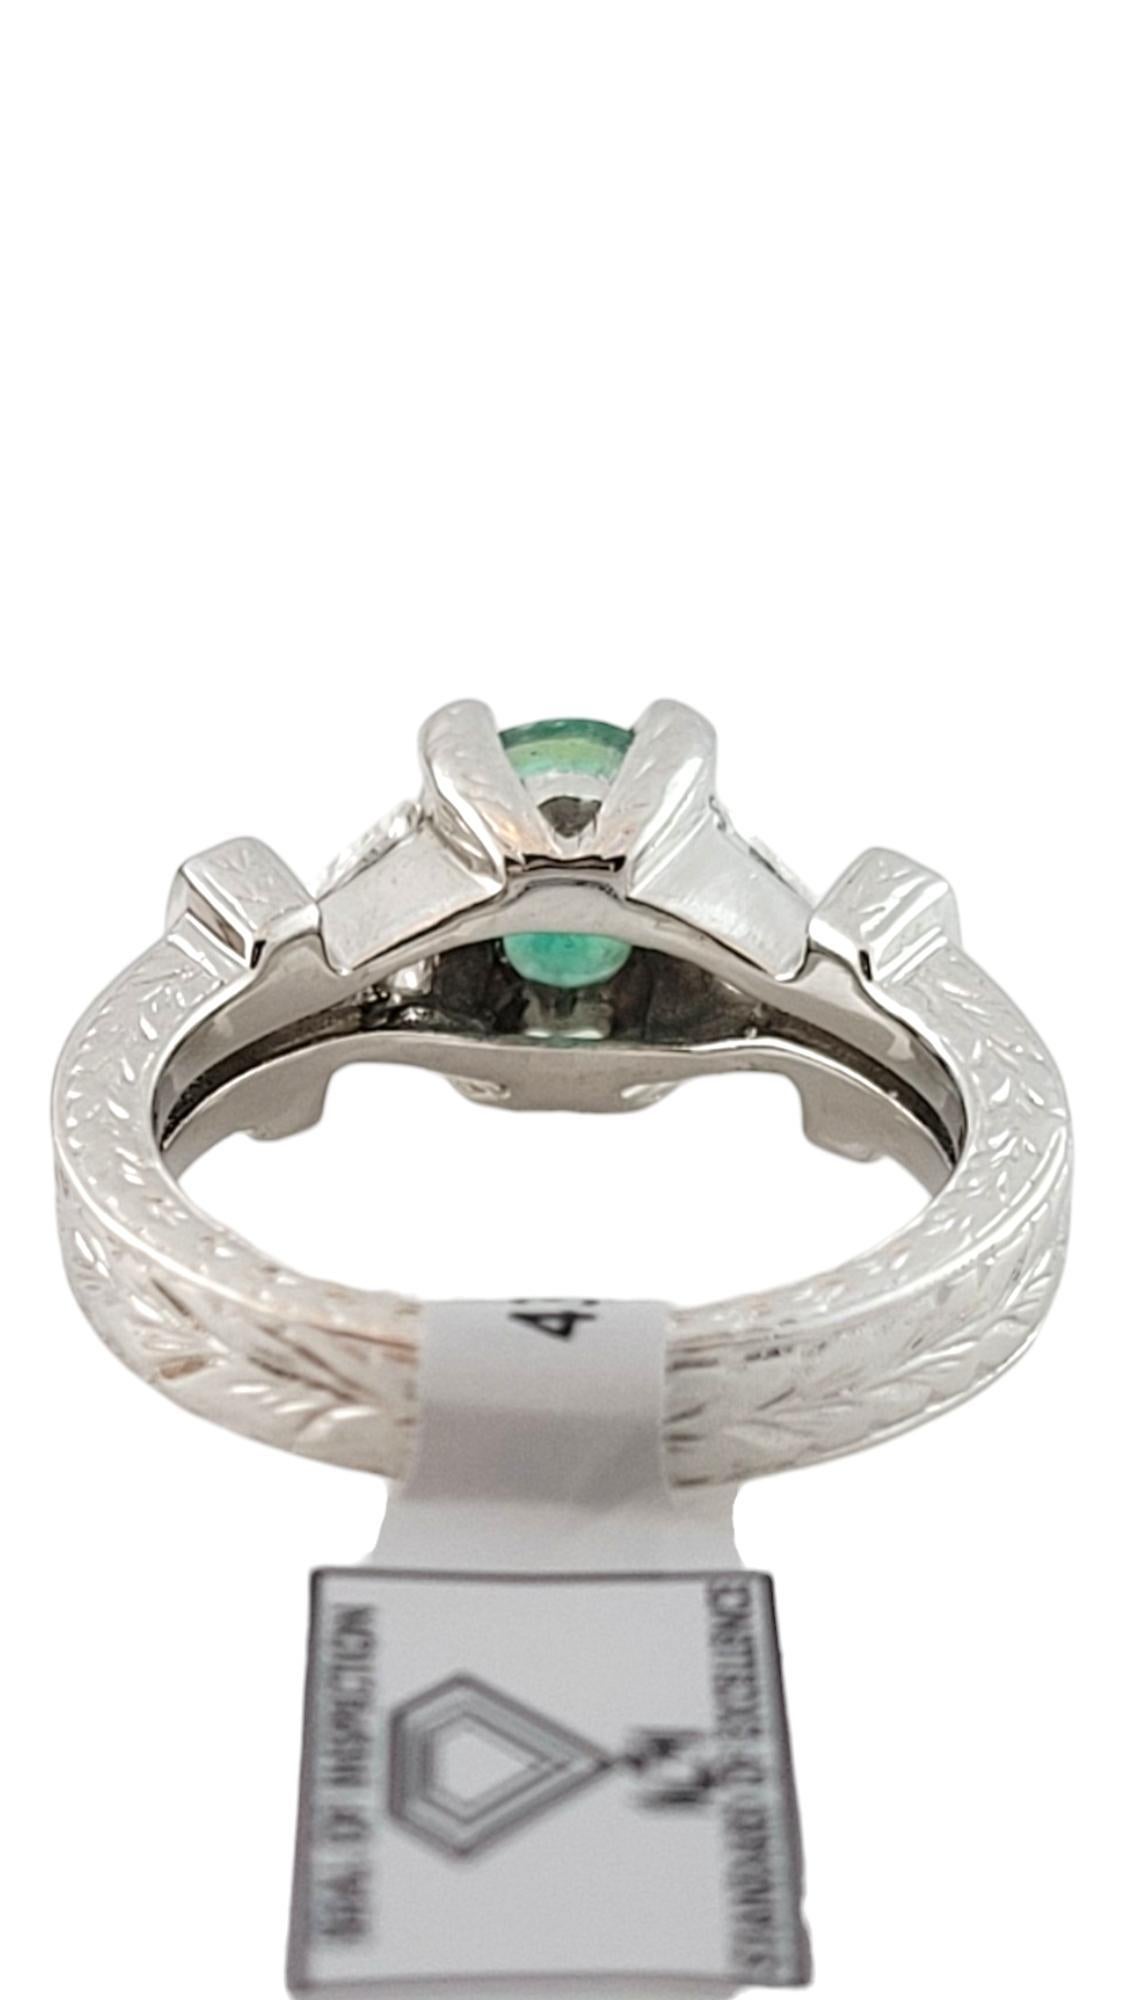 14K White Gold Natural Emerald and Diamond Ring Size 5.5 #16460 In Good Condition For Sale In Washington Depot, CT